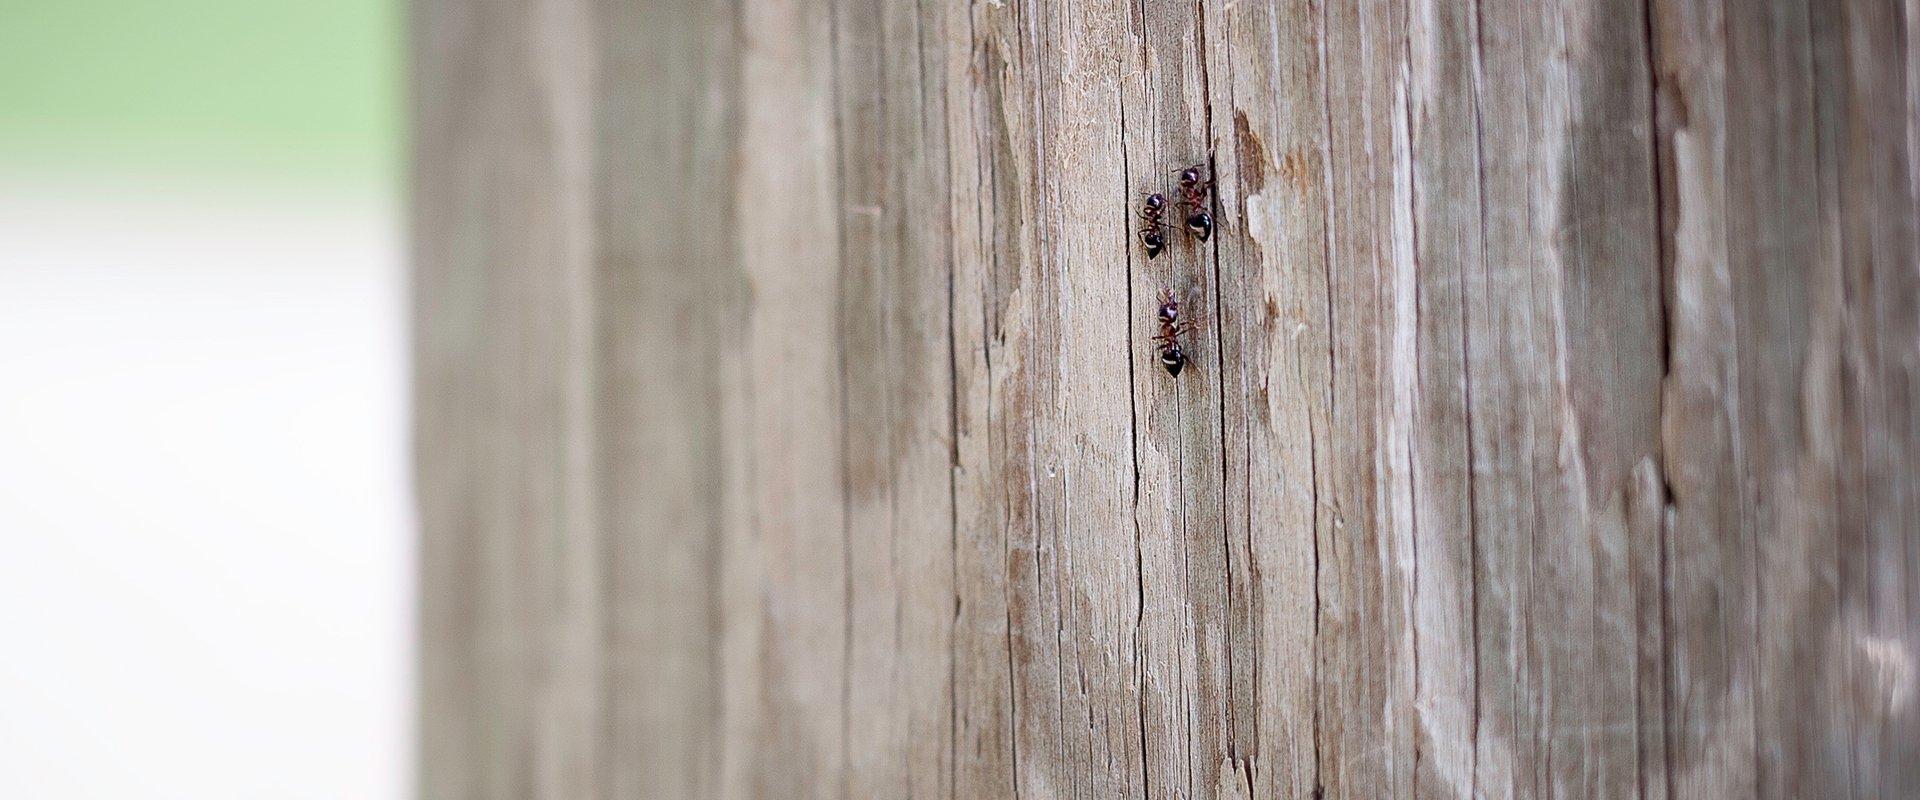 carpenter ants on the side of a shed